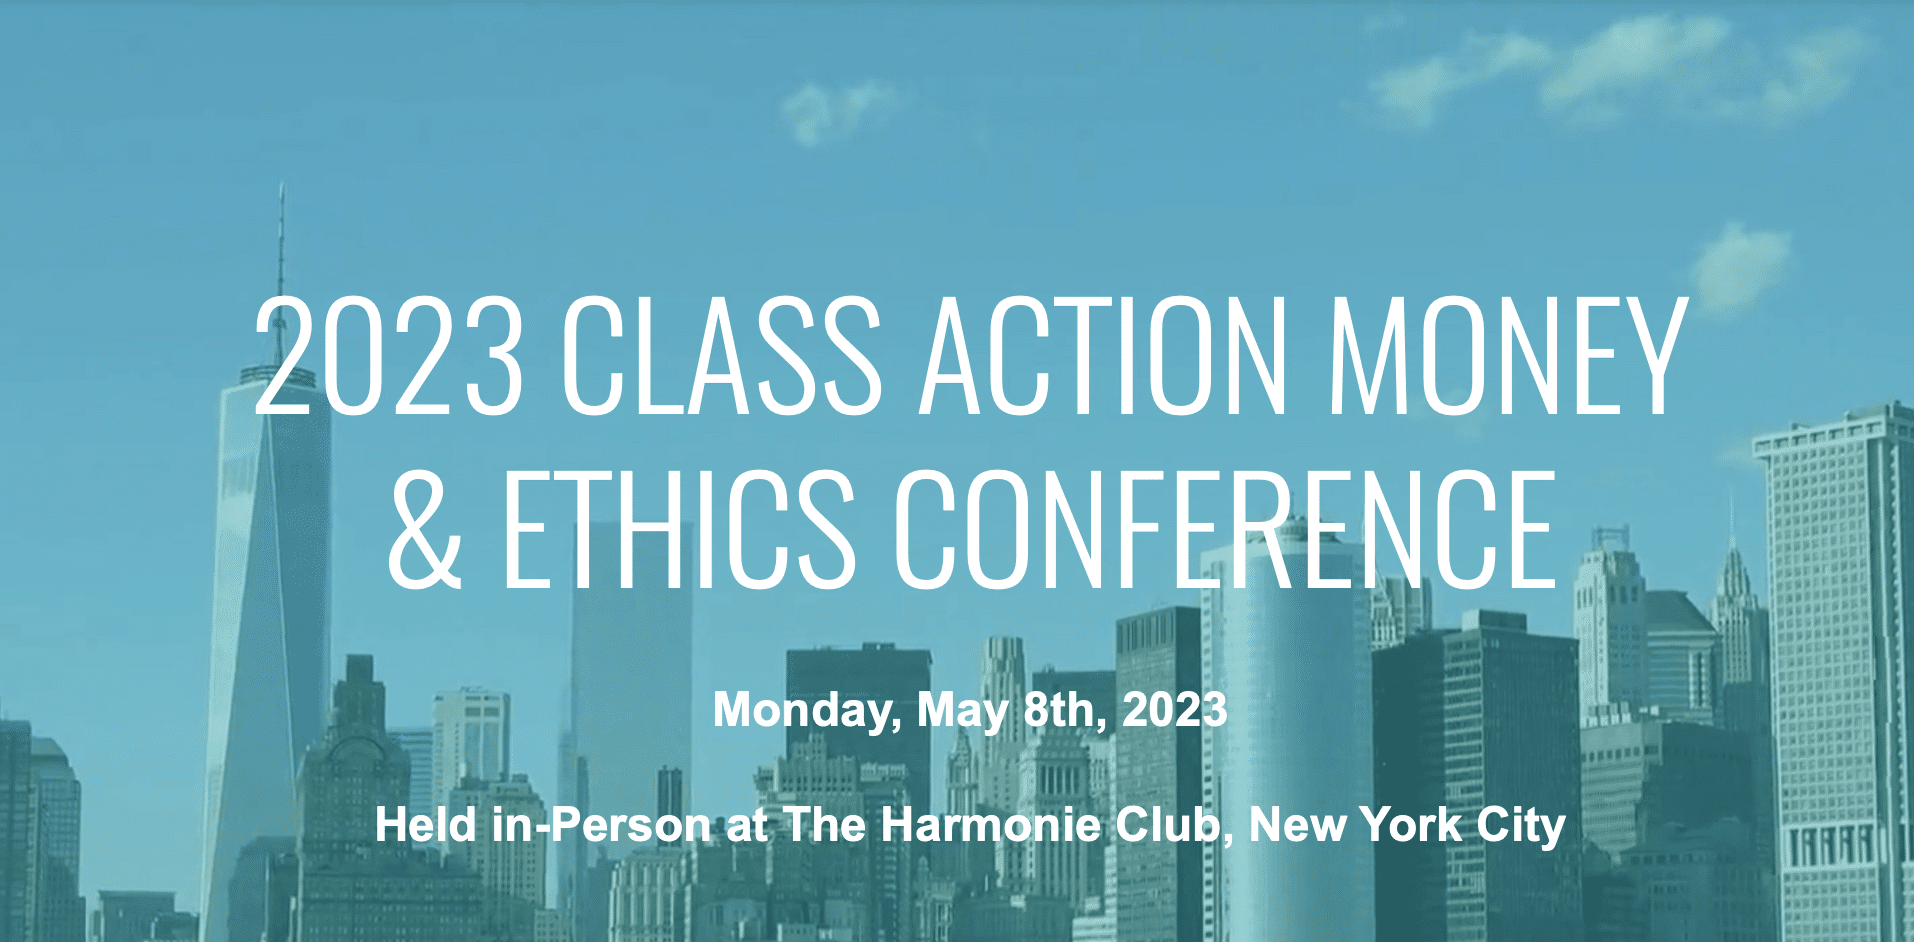 2023 Class Action Money & Ethics Conference